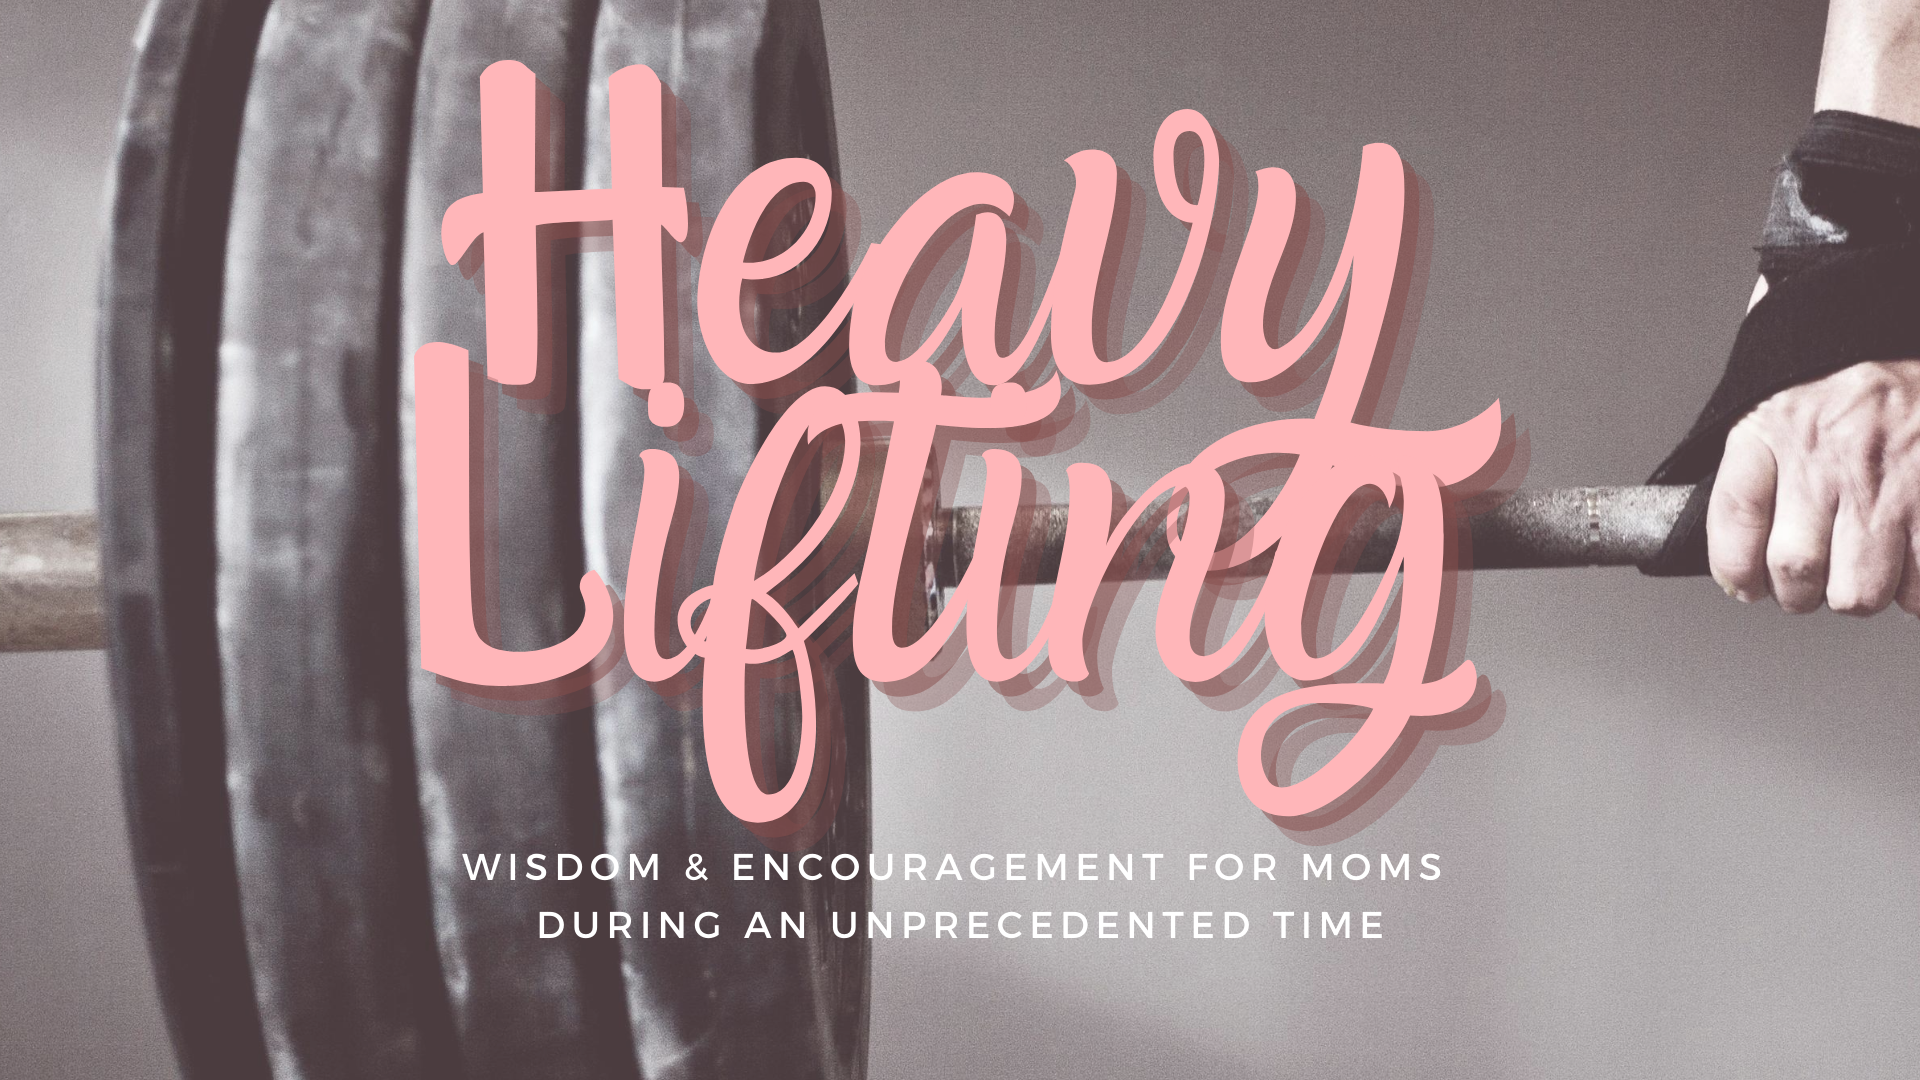 Heavy Lifting: An Event for Moms